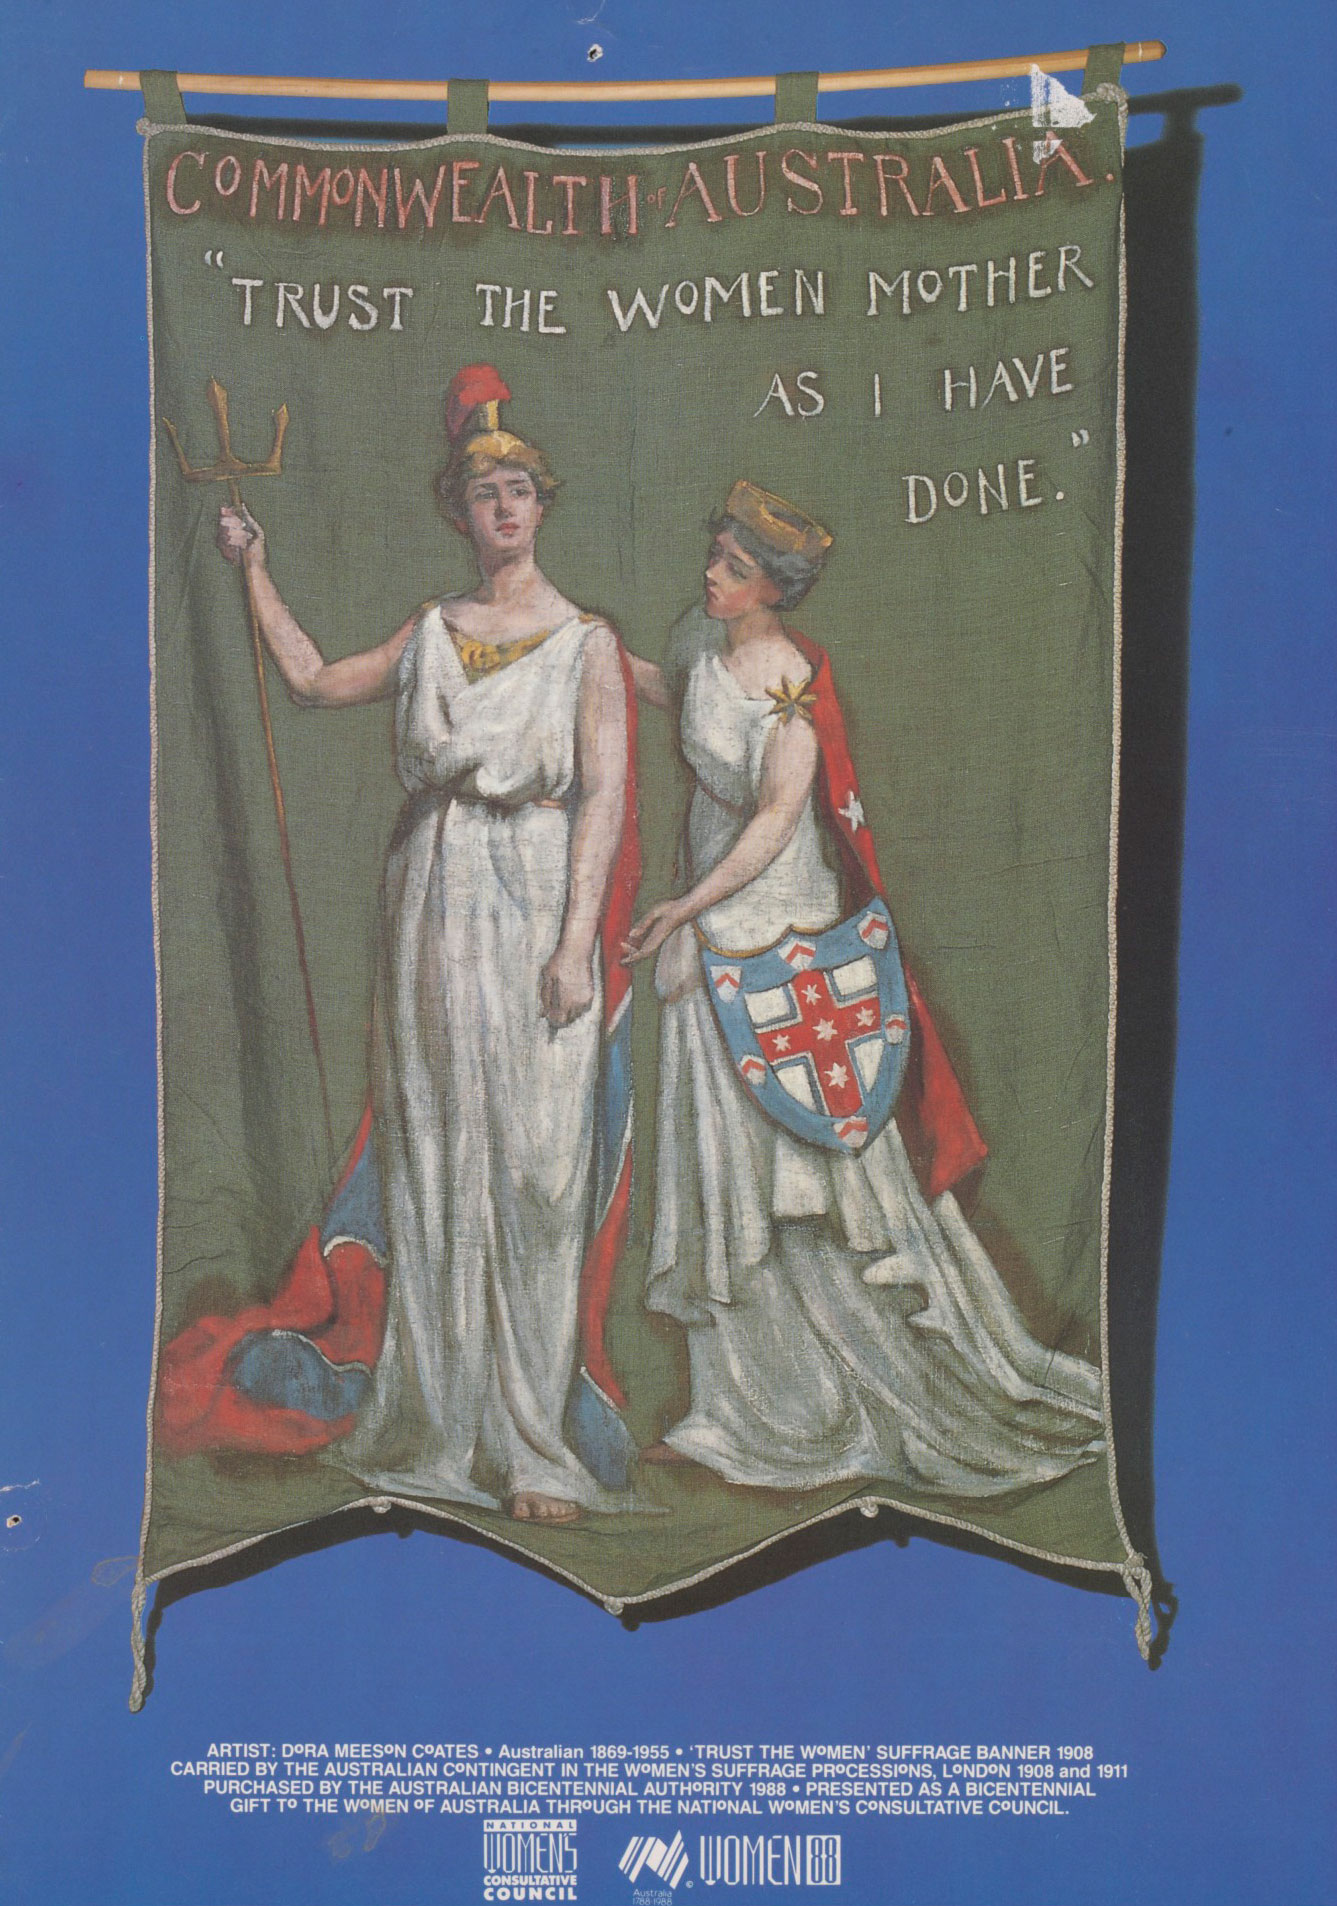 Banner encouraging the United Kingdom to give women the vote, by Dora Meeson Coates, 1908